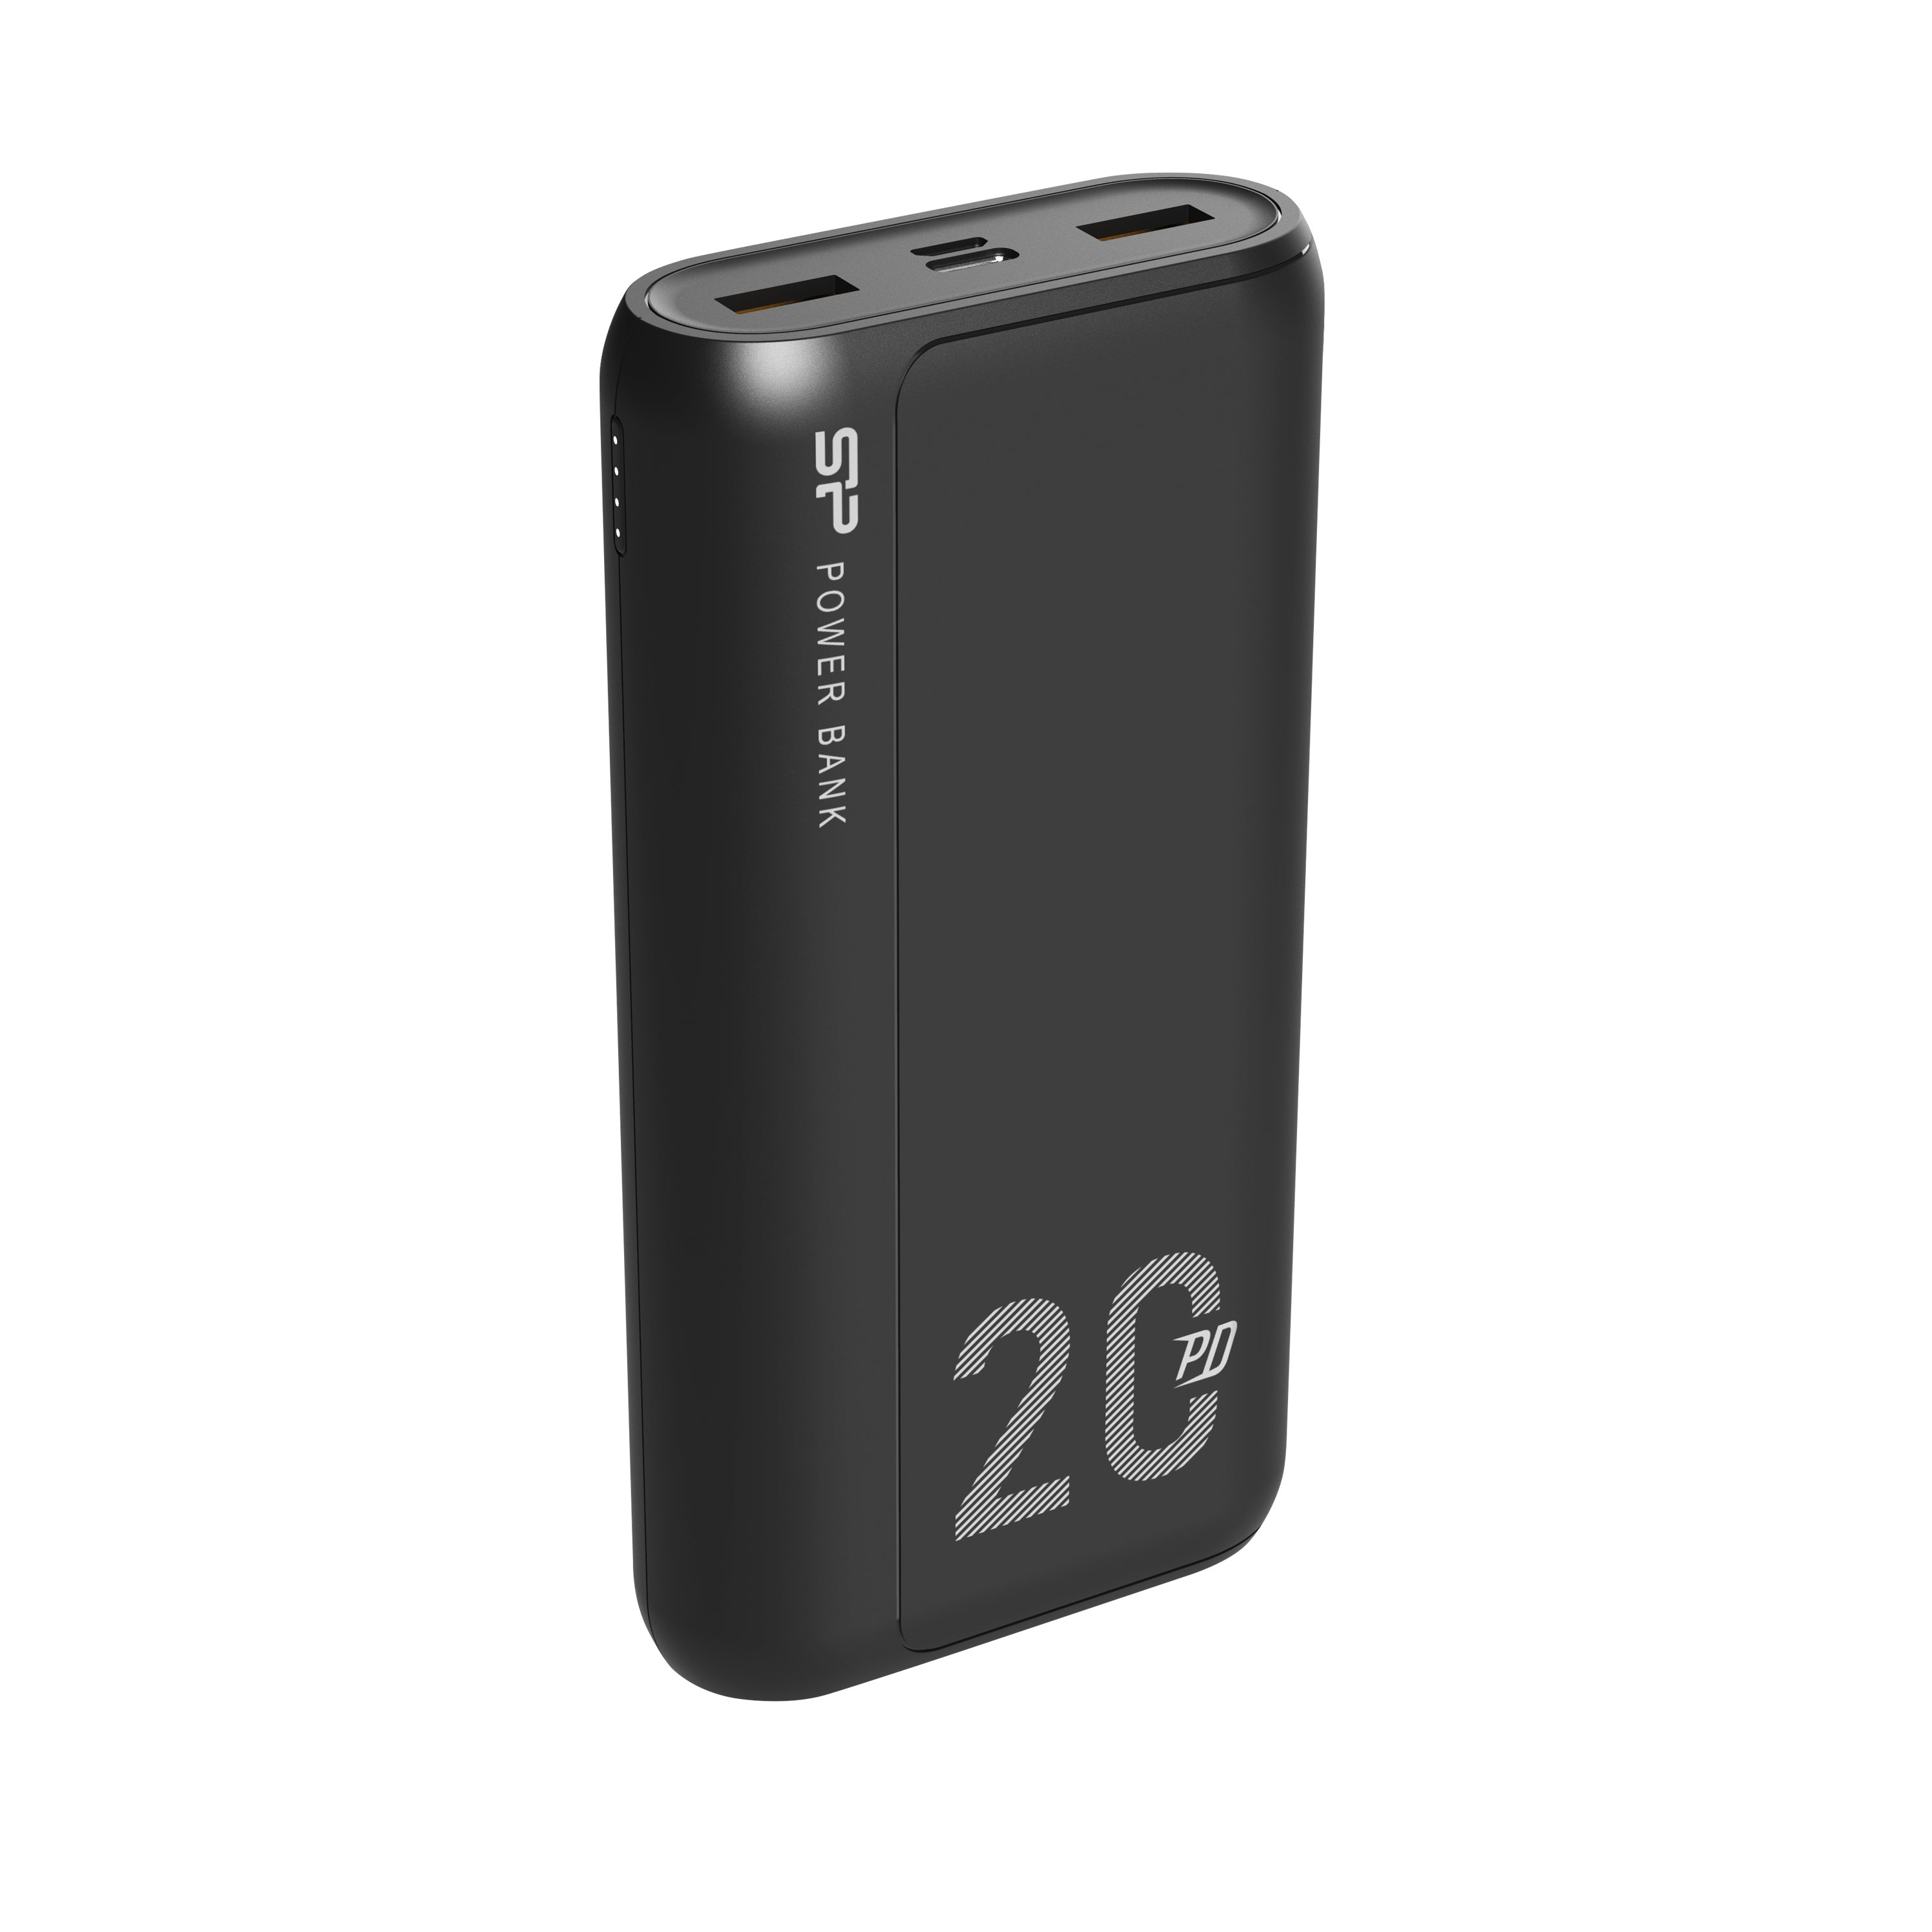 Silicon Power QS15 20,000mAh Portable Phone Charger Power Bank QC 3.0/ 18W Power Delivery (PD) Fast Phone Charging [Black/White]